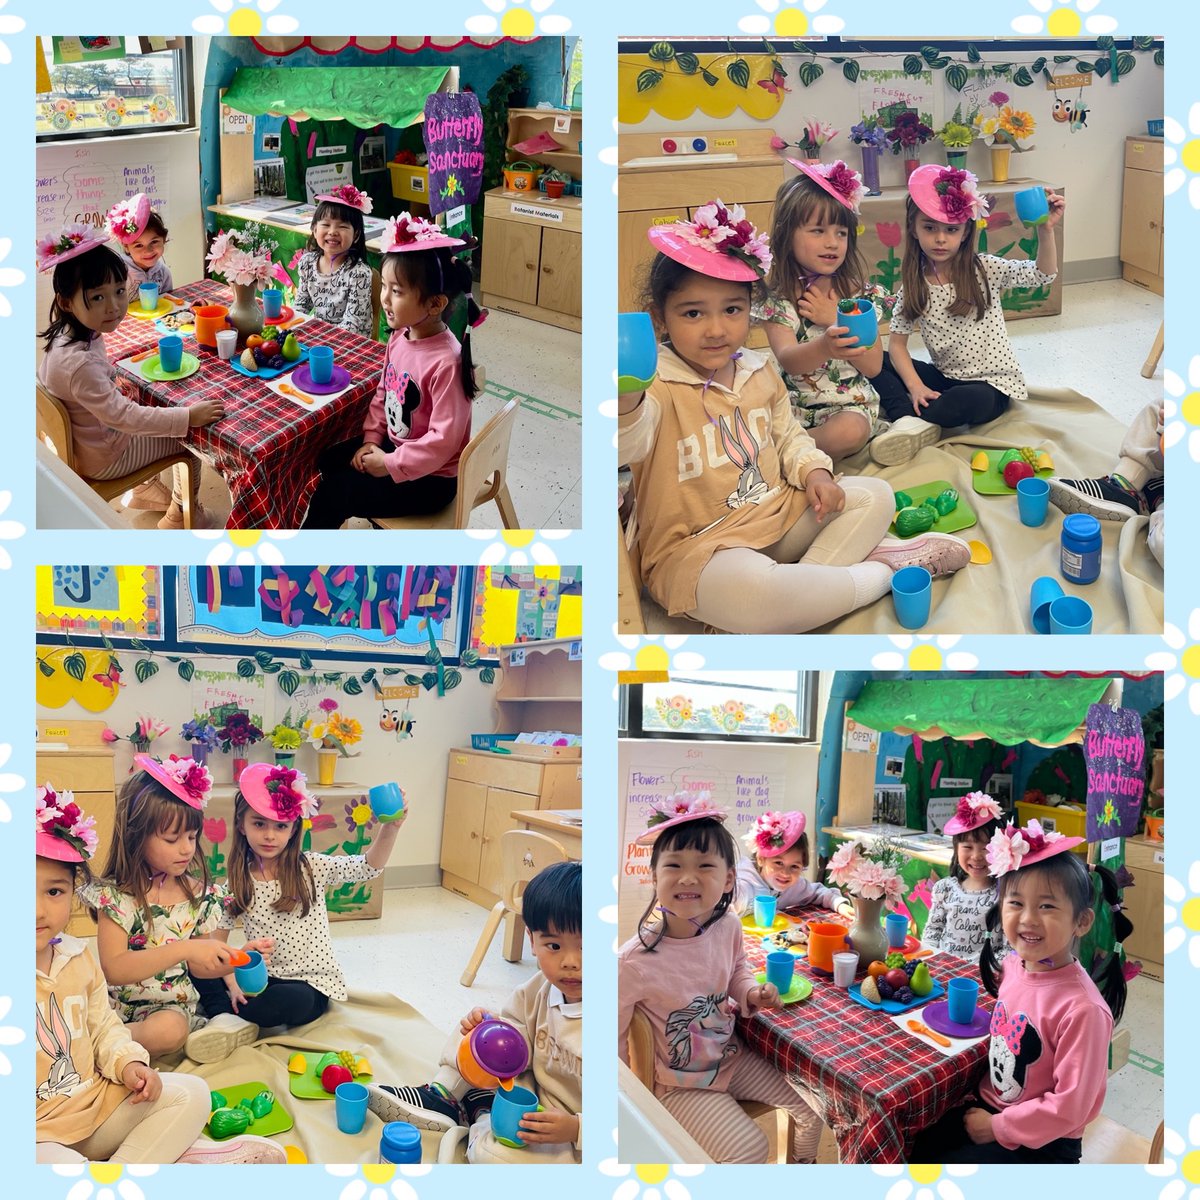 Tea at high noon. These cuties from our Father Cap site had their own #MSK tea party in style. @DrMarionWilson @EdeleWilliams @D31DSPalton @CSD31SI @CChavezD31 @DOEChancellor @shah_reen 1007